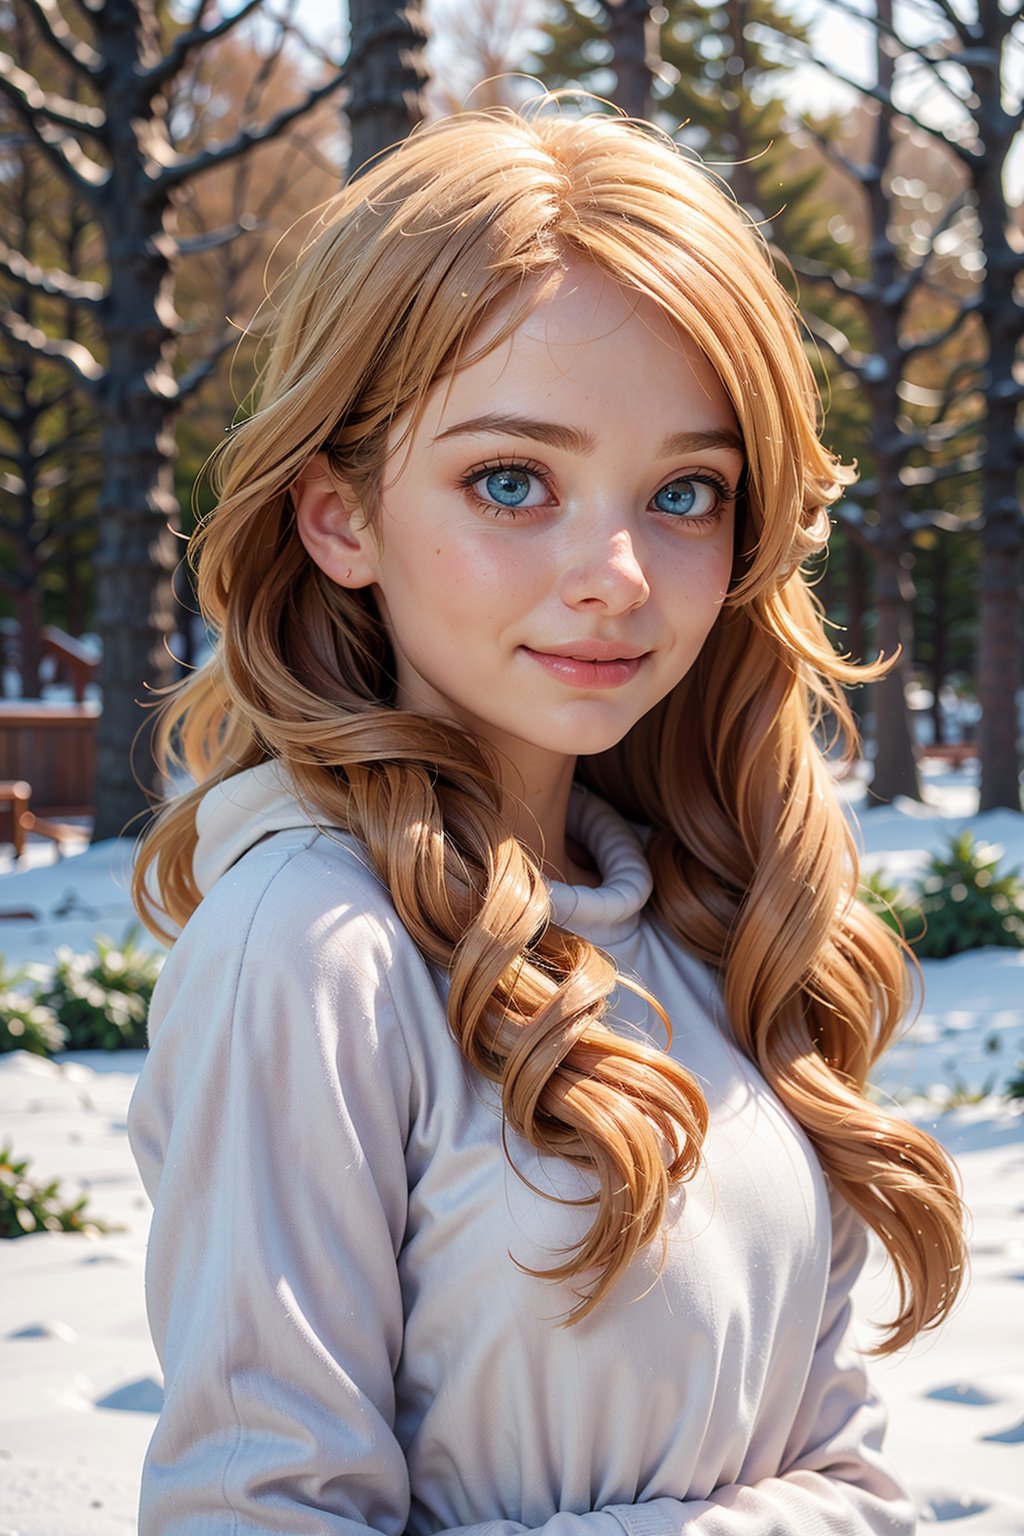 (best quality,  4k,  8k,  highres,  masterpiece:1.2),  ultra-detailed,  (realistic,  photorealistic,  photo-realistic:1.37),  portrait,  beautiful and smiling caucasian woman,  cinematic,  winter clothes,  Ondas e Nuances,  detailed symmetric hazel eyes,  circular iris,  vivid colors,  winter scenery,  soft snowflakes falling,  icy breath,  rosy cheeks,  pure white background,  subtle warm lighting,  innocence and radiance,  sparkling eyes,  joyful expression,  luxurious fur trim on the clothing,  frosty winter air,  subtle wind blowing through her hair,  subtle hint of pink in her lips,  elegant posture,  confident stance,  delicate snowflakes decorating her hair,  long flowing blonde hair,  wonder and serenity in her gaze,  captivating beauty,  snow-covered trees in the background,  peaceful and enchanting winter scene.,<lora:EMS-209910-EMS:0.800000>